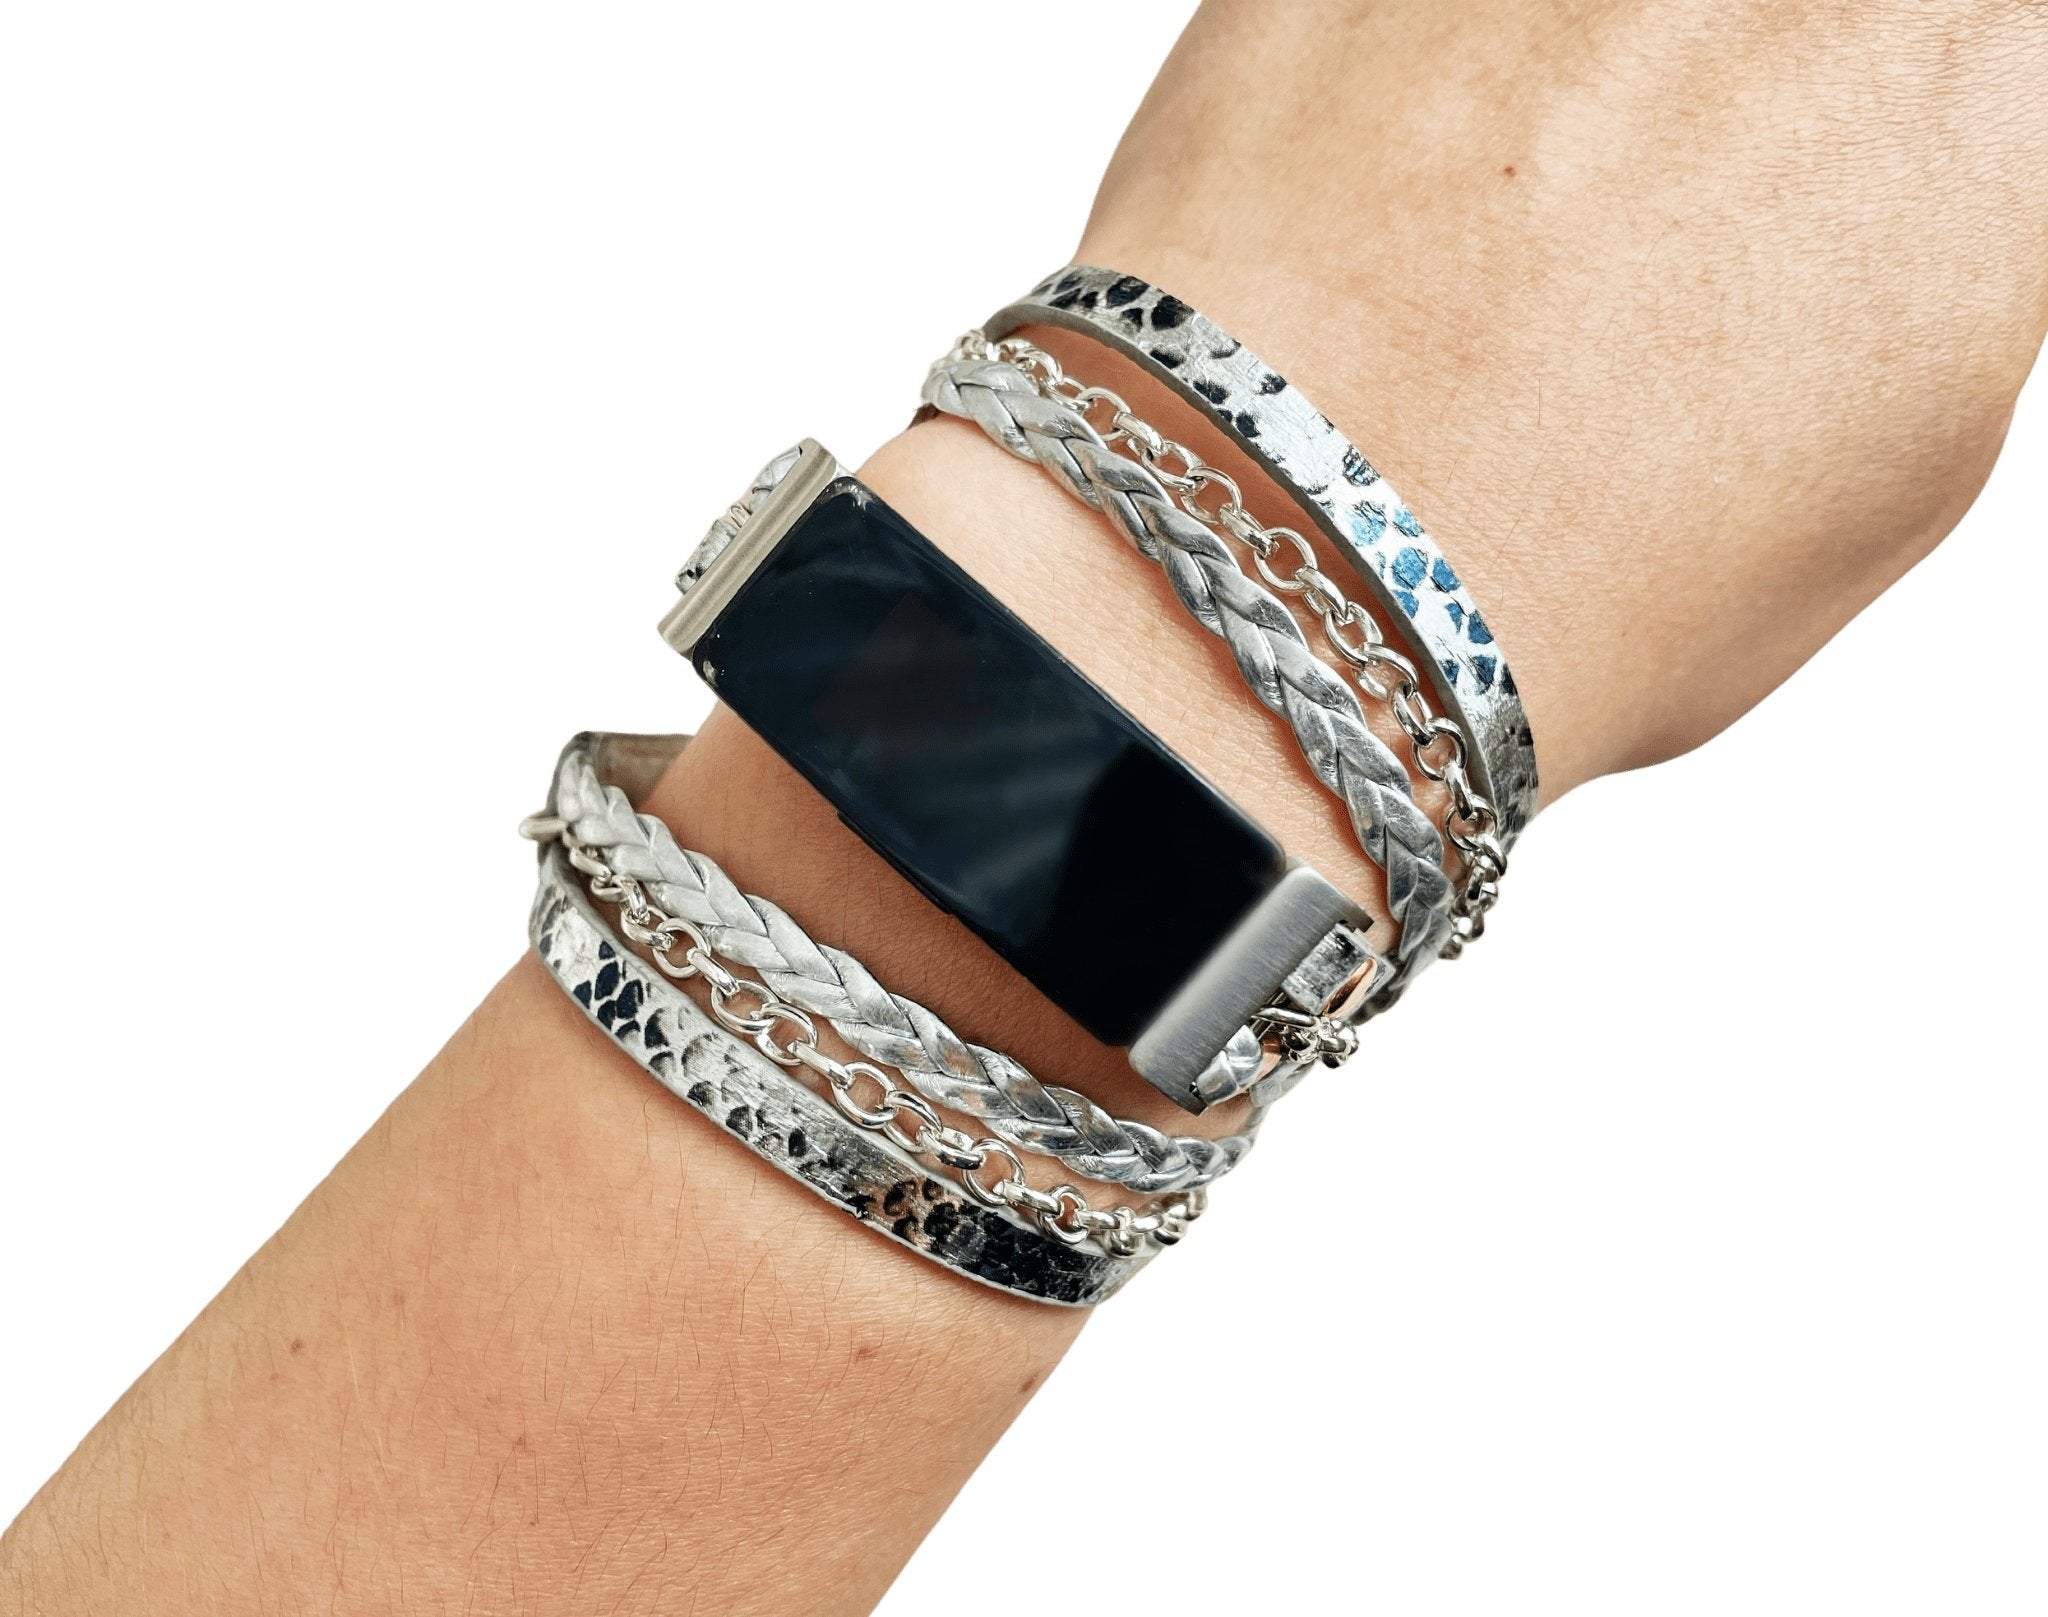 Luxury Boho Chic Silver Snake Print Watch Band with Silver Chain for Fitbit Inspire - Mareevo